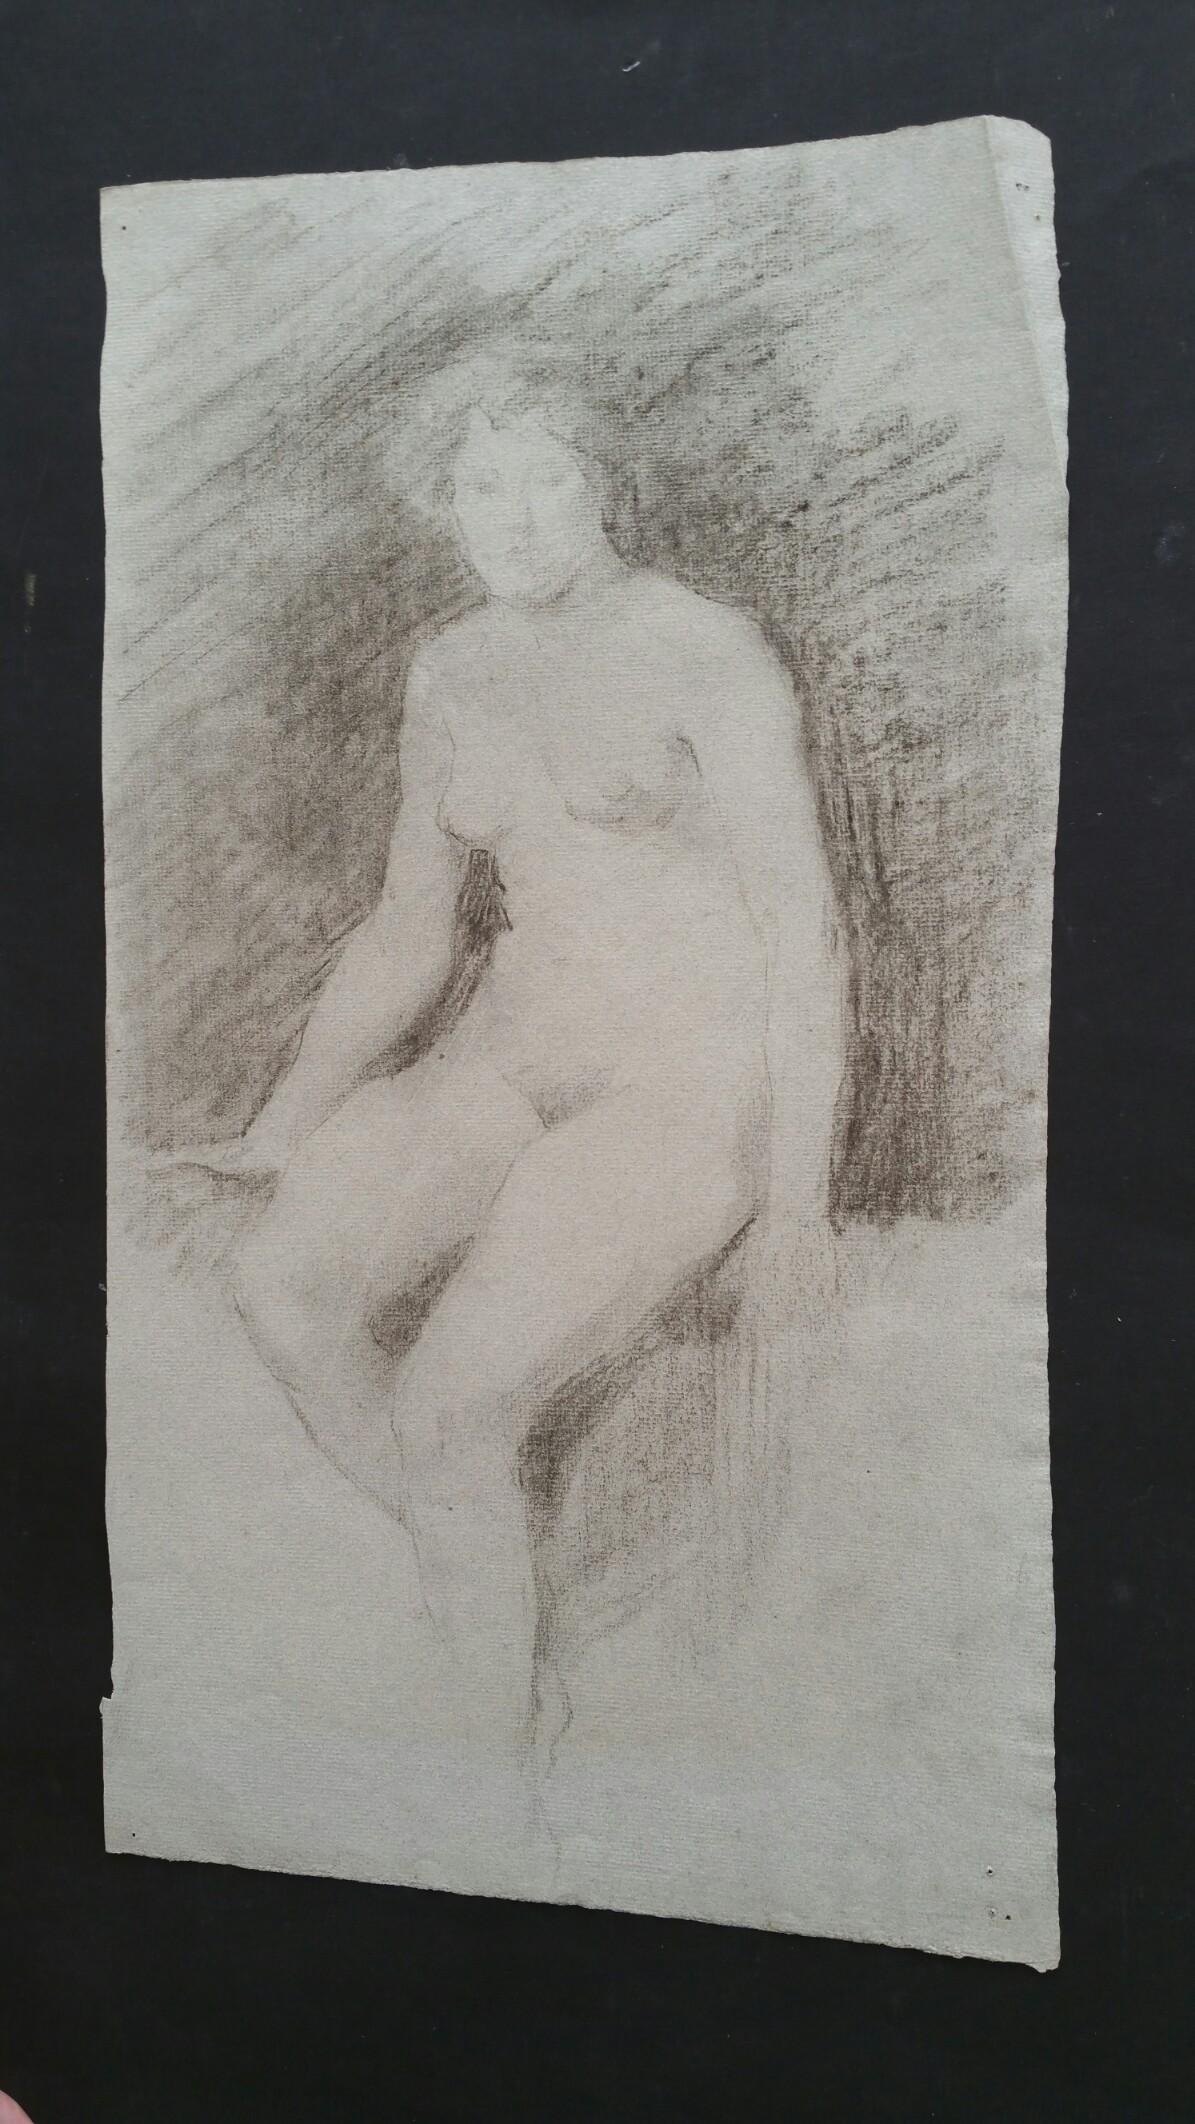 English Graphite Sketch of a Female Nude, Seated
by Henry George Moon (British 1857-1905)
on pale grey artists paper, unframed
measurements: sheet 18.75 x 10.25 inches (width measured at narrowest point of sheet)

provenance: from the artists